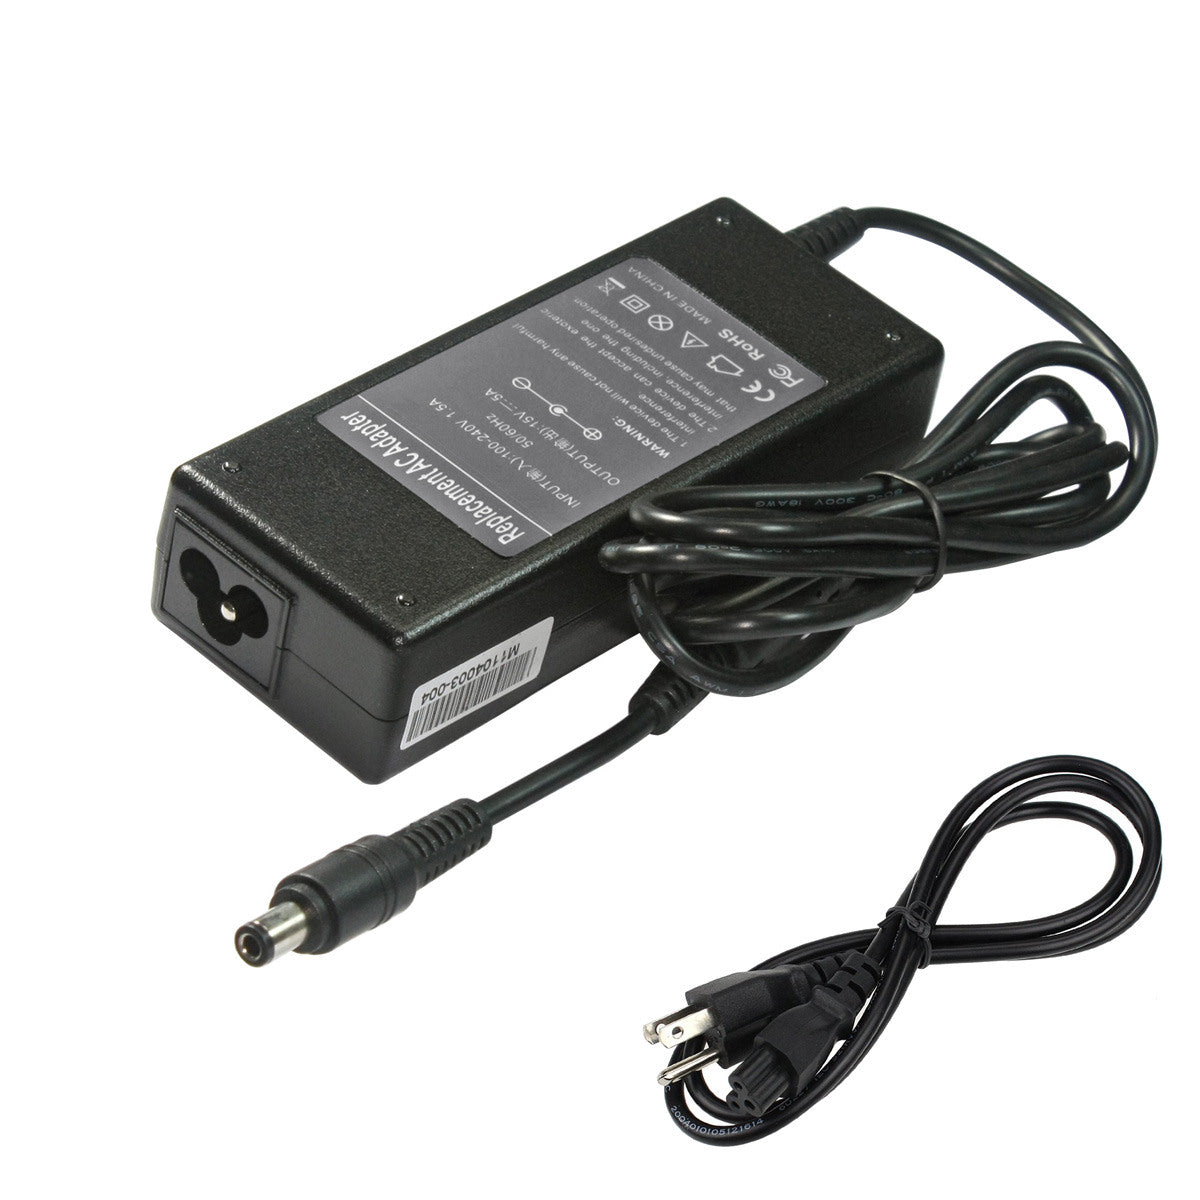 Compatible Designed Toshiba Satellite A10 AC Adapter.